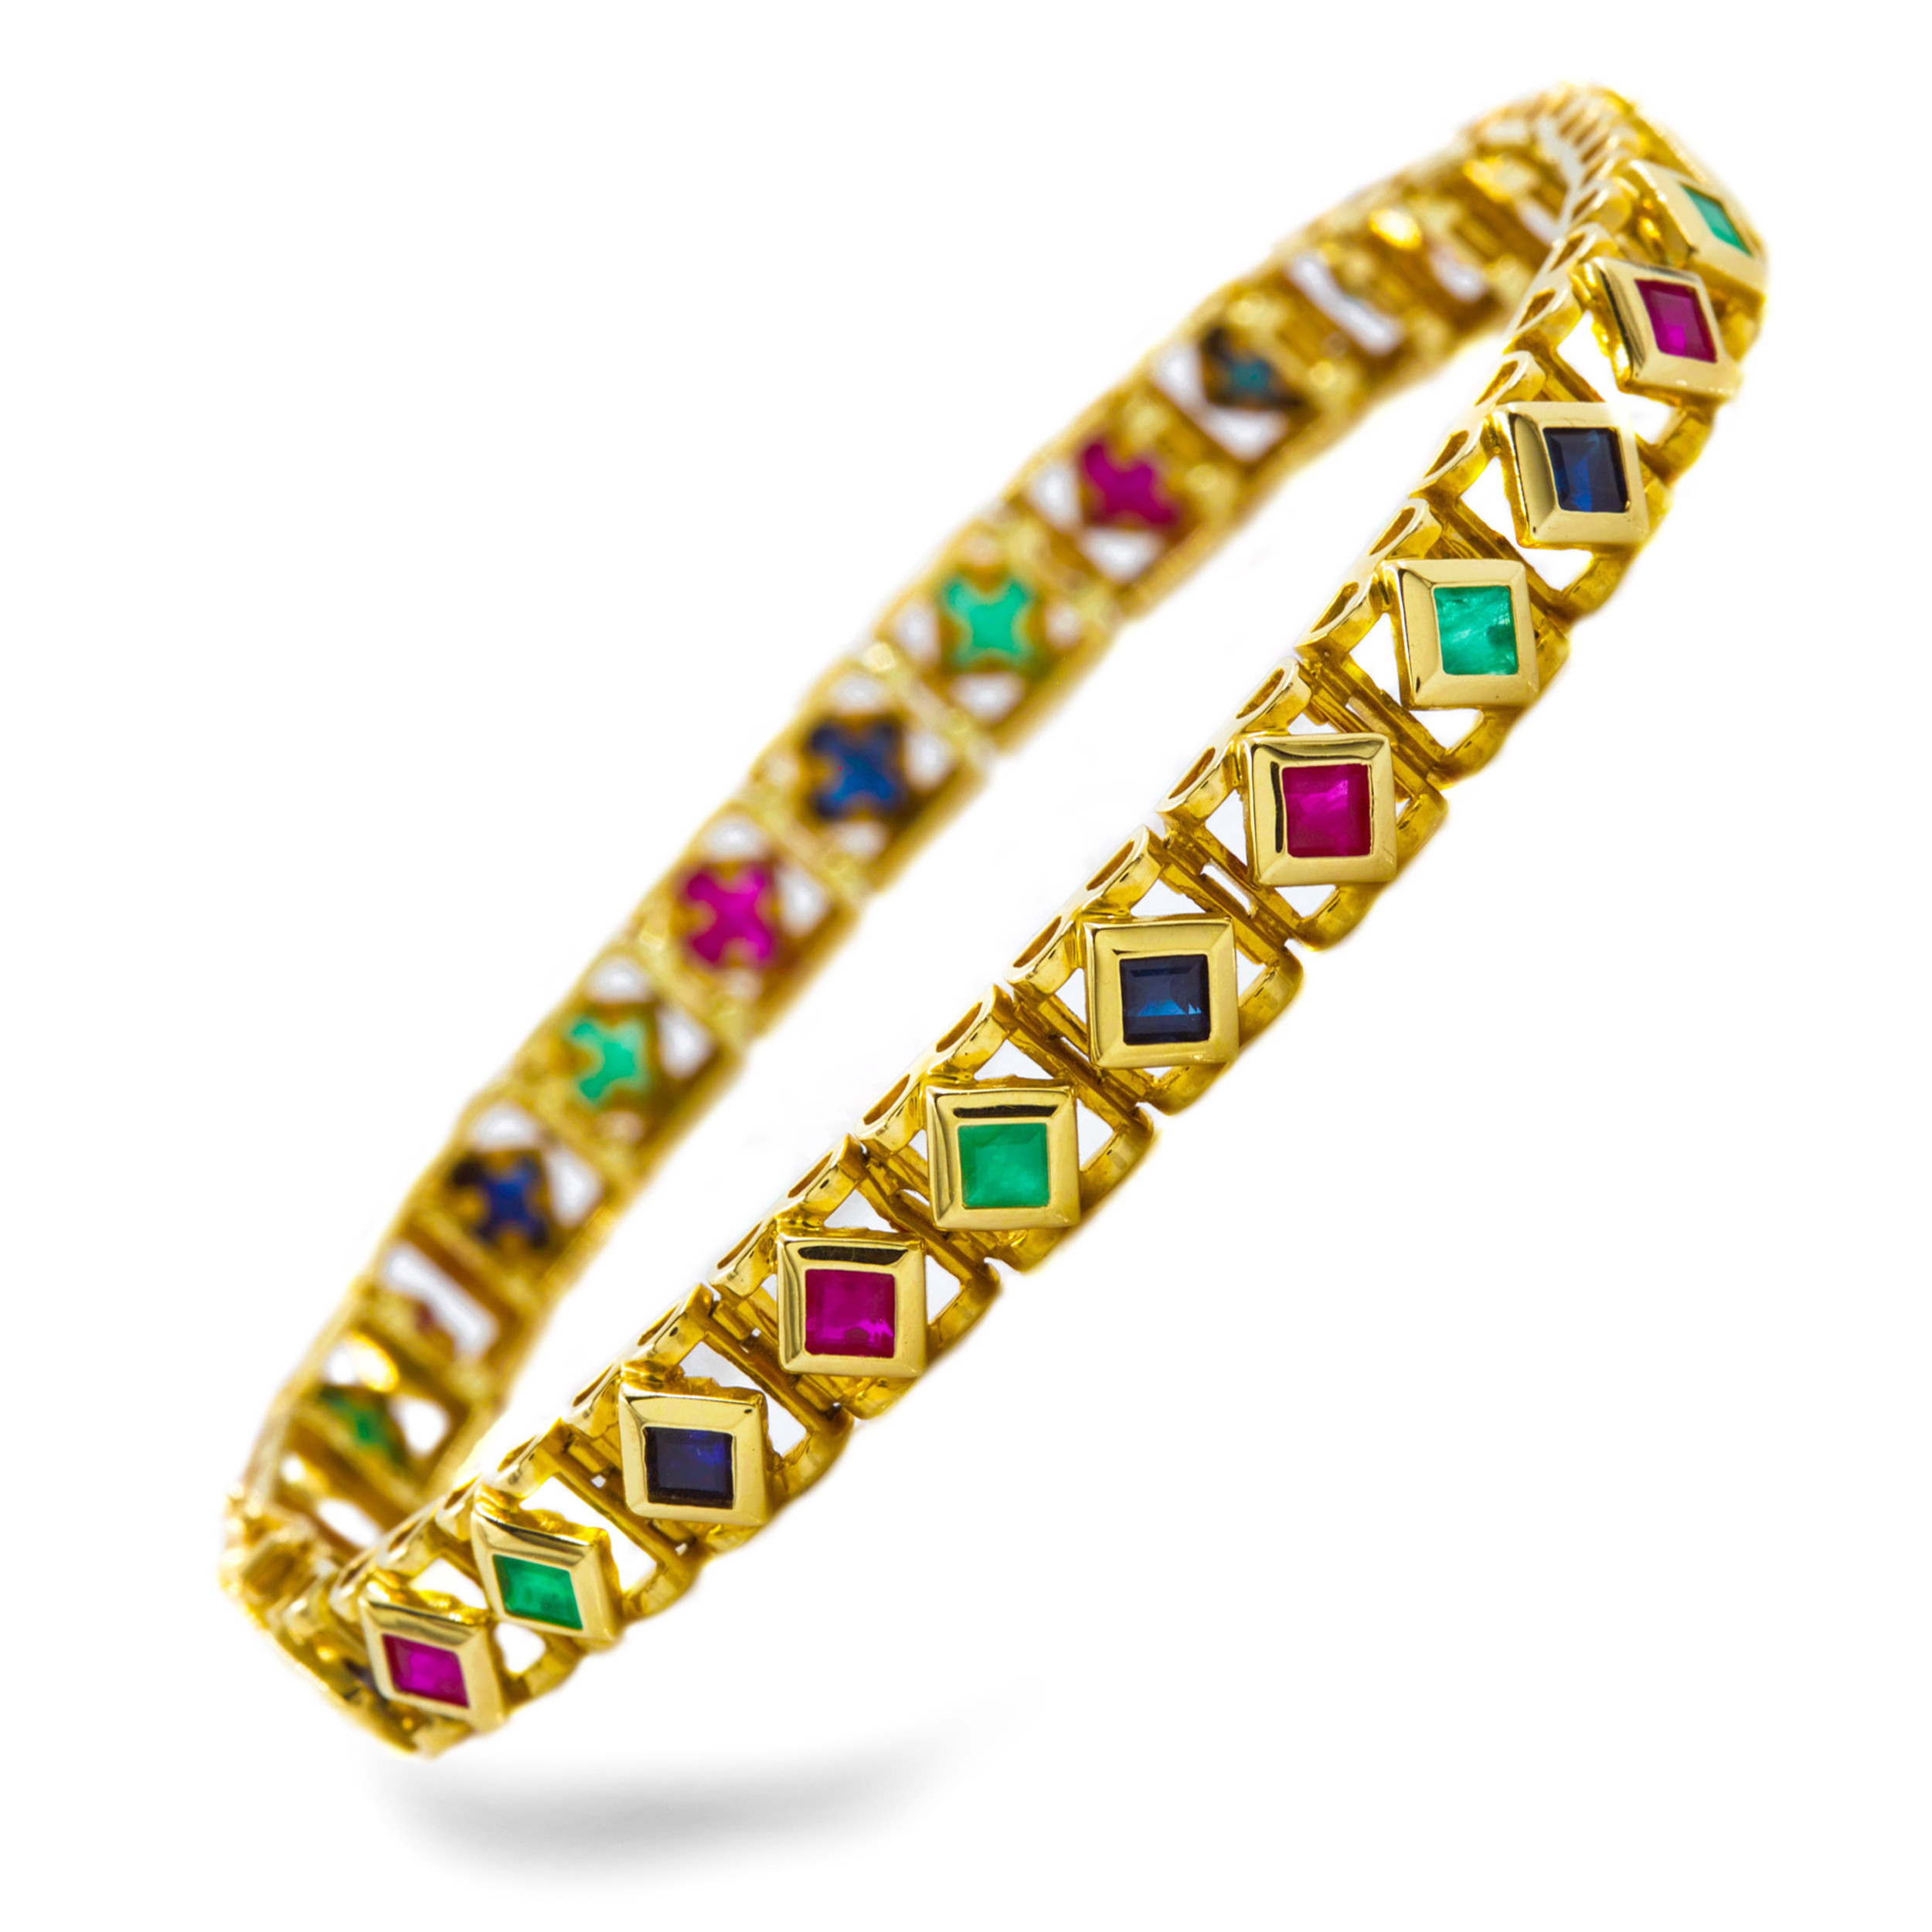 Noel Ruby and Emerald Bayberry 7 Stone Bracelet in 14k Gold - 14k Yellow  Gold / X-Small (6 + 0.5 Extender)